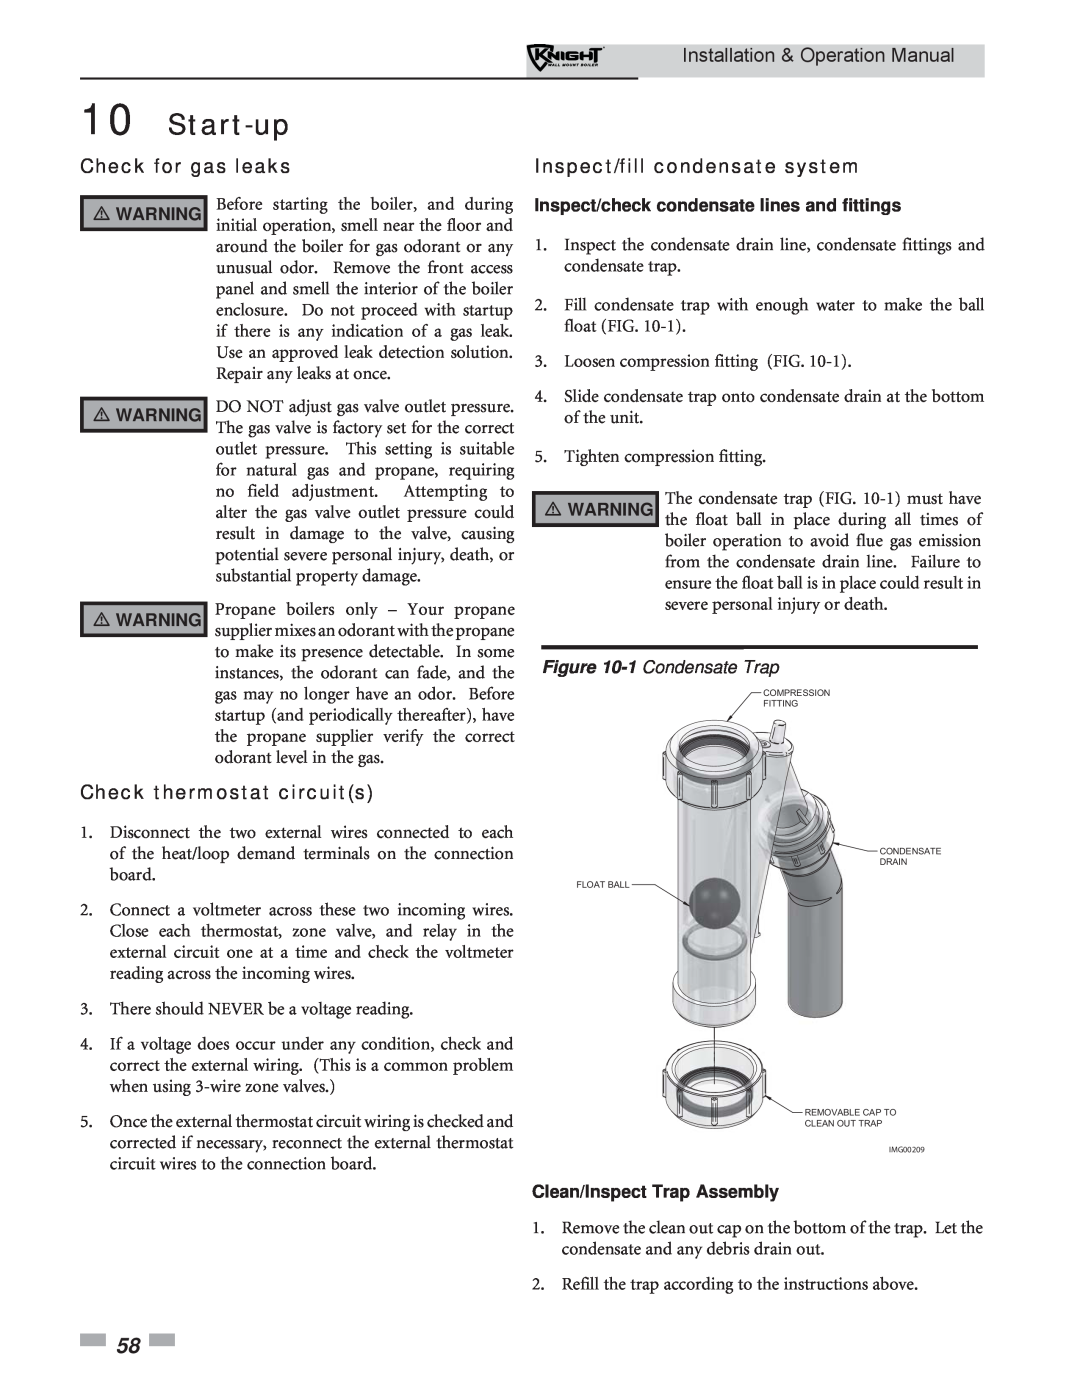 Lochinvar WH 55-399 Check for gas leaks, Inspect/fill condensate system, Check thermostat circuits, 1 Condensate Trap 